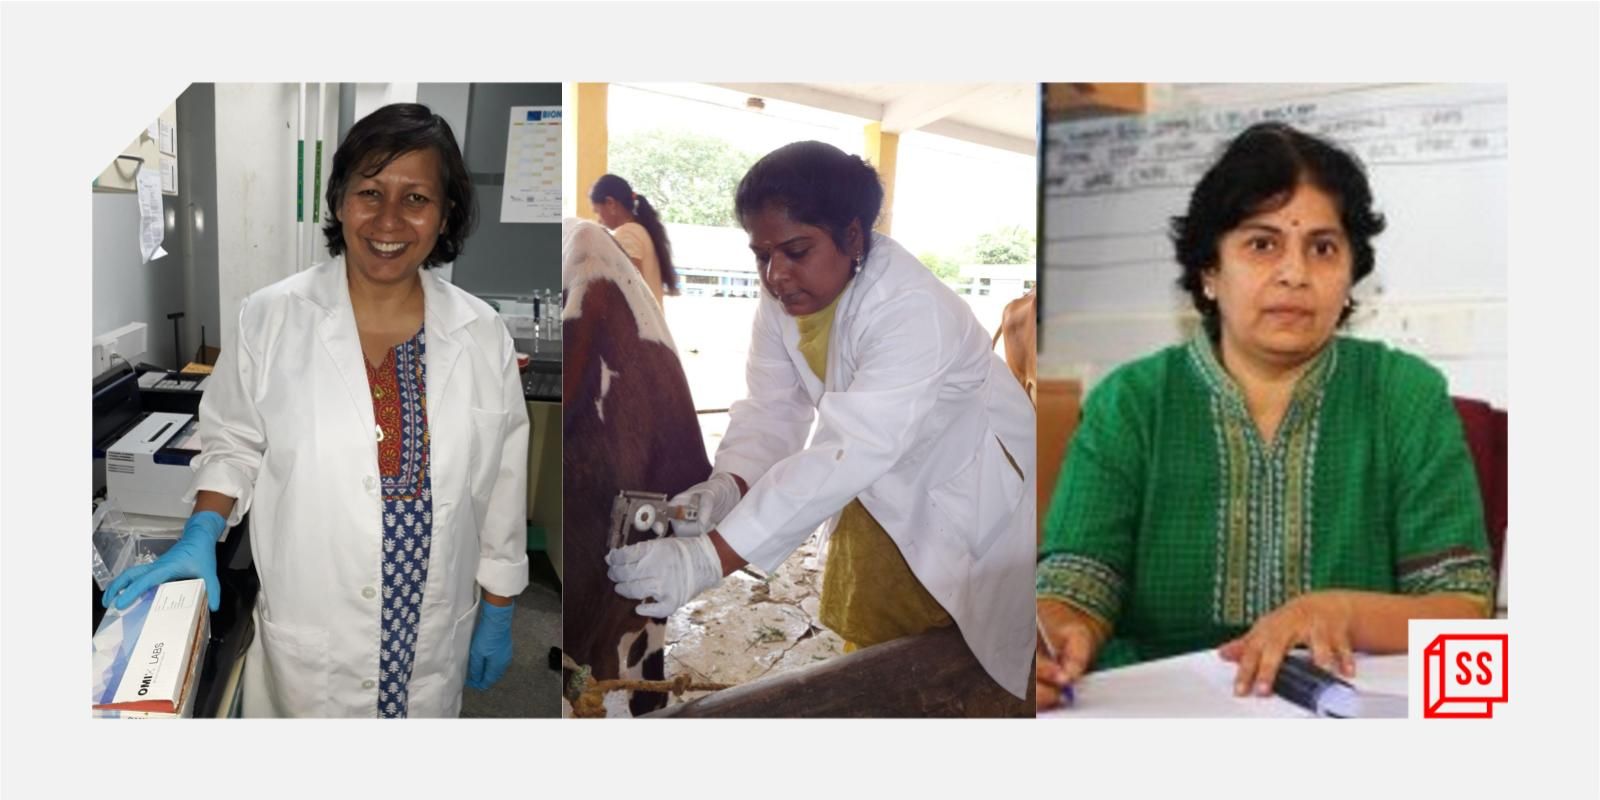 These five women entrepreneurs have made path breaking innovations in healthcare